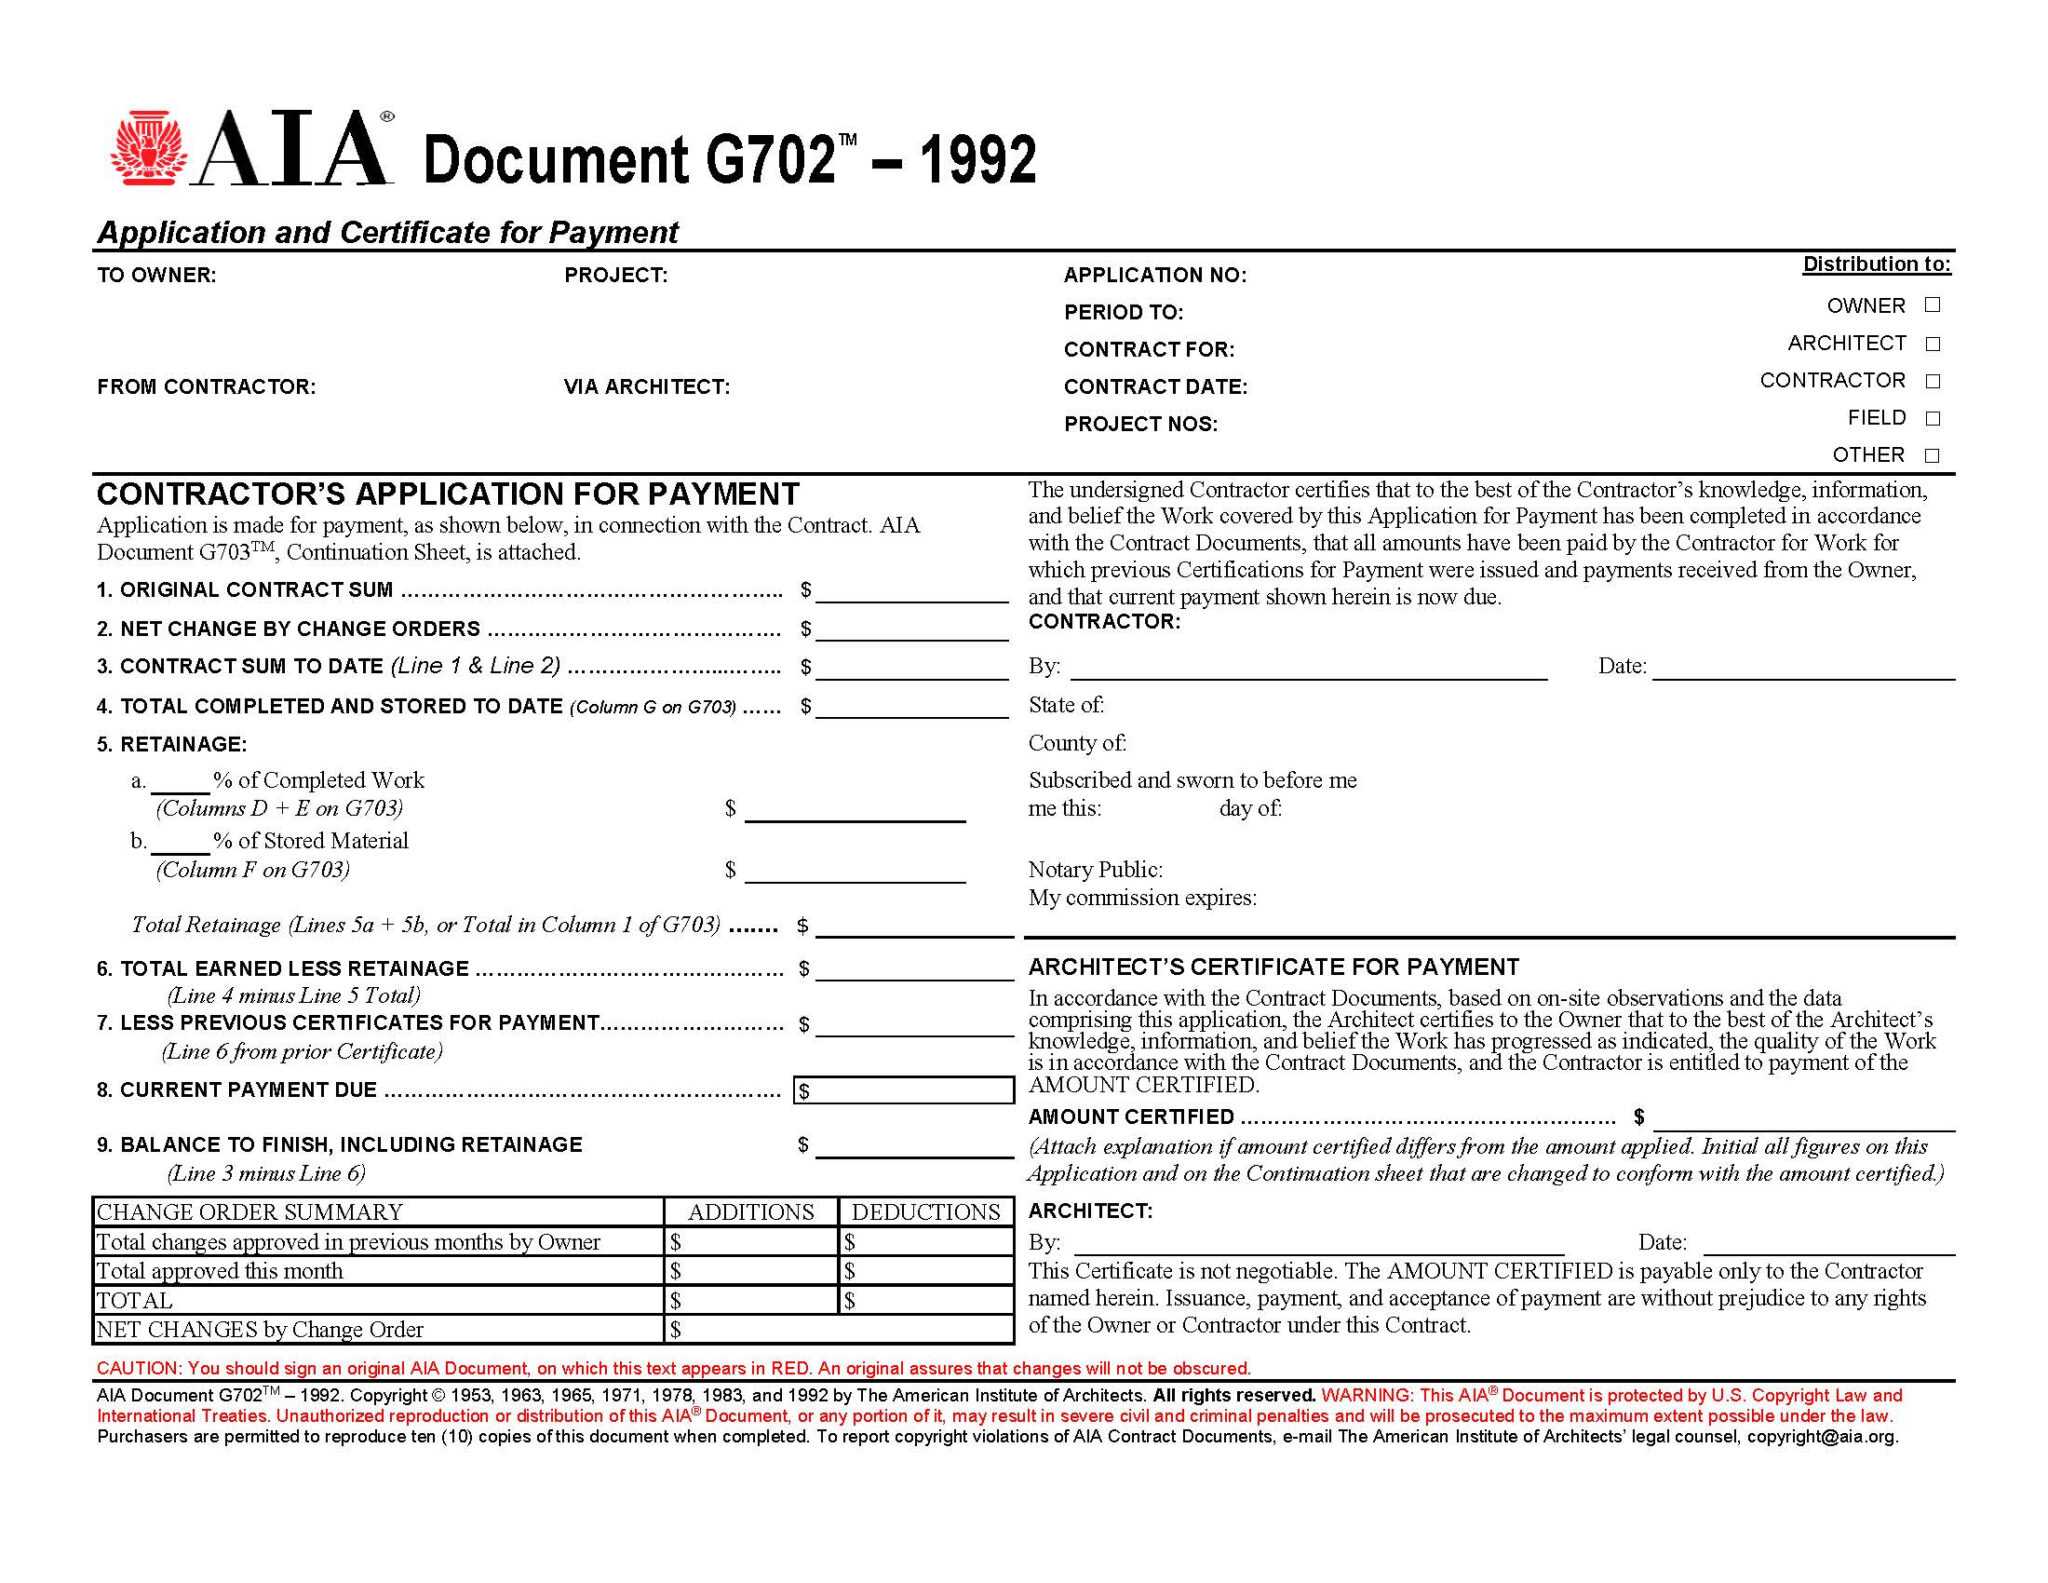 Aia Forms G702 & G703 Application, Certificate, And Continuation within